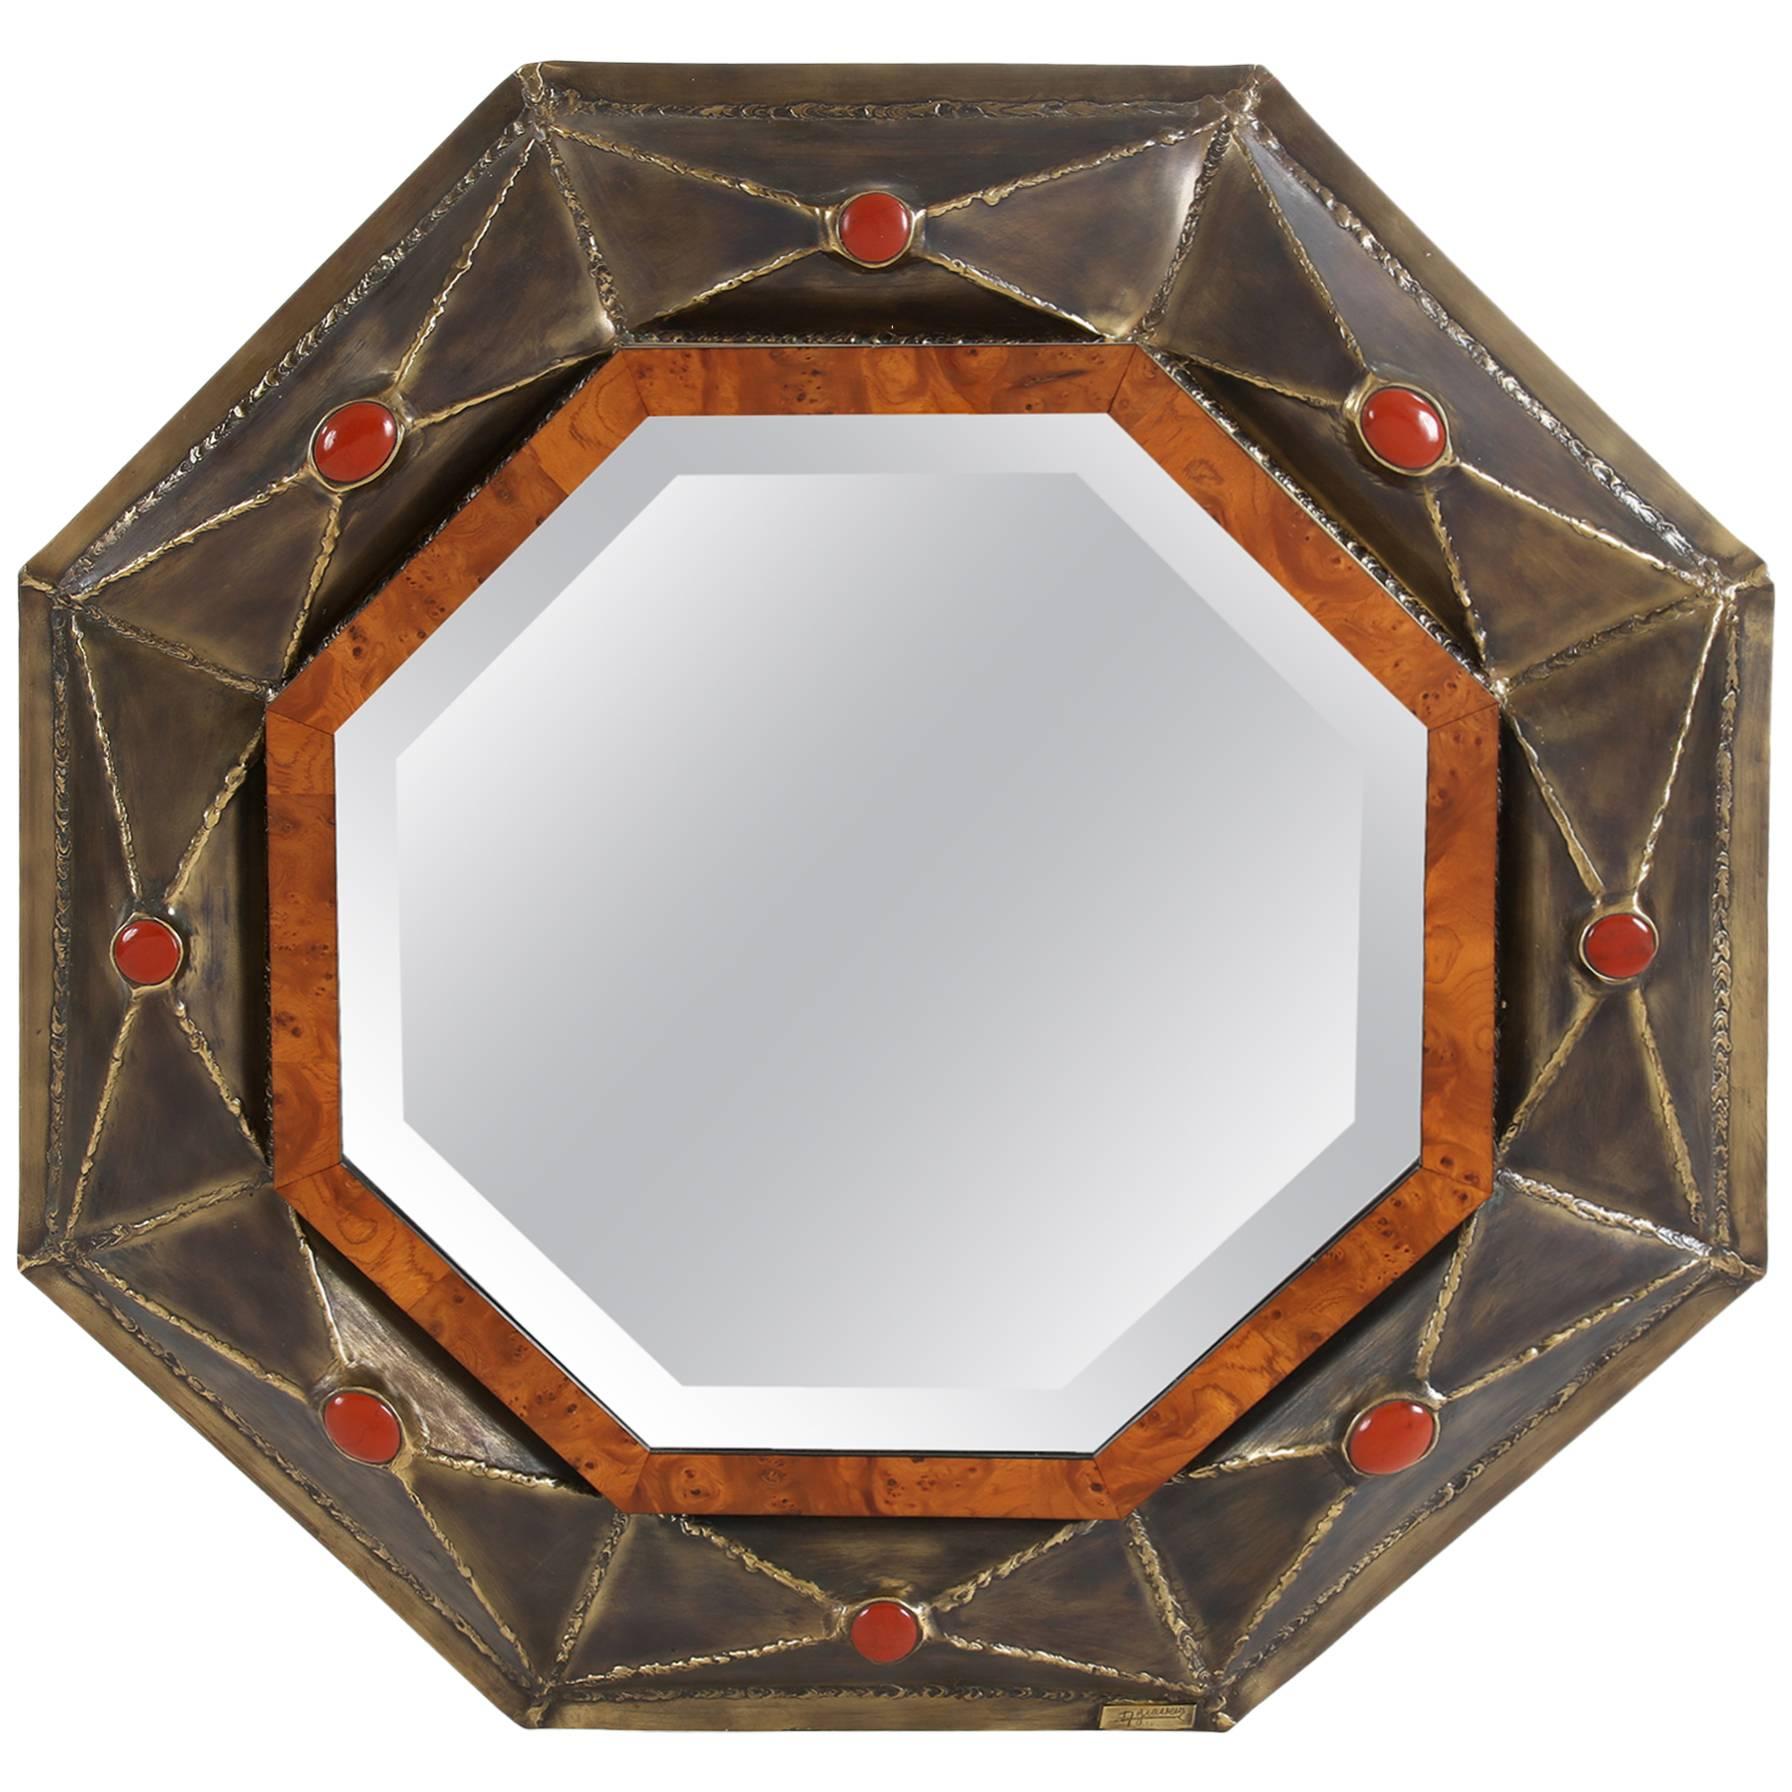 Elegant Beveled Corners Mirror by Jacques Duval-Brasseur, circa 1970 For Sale